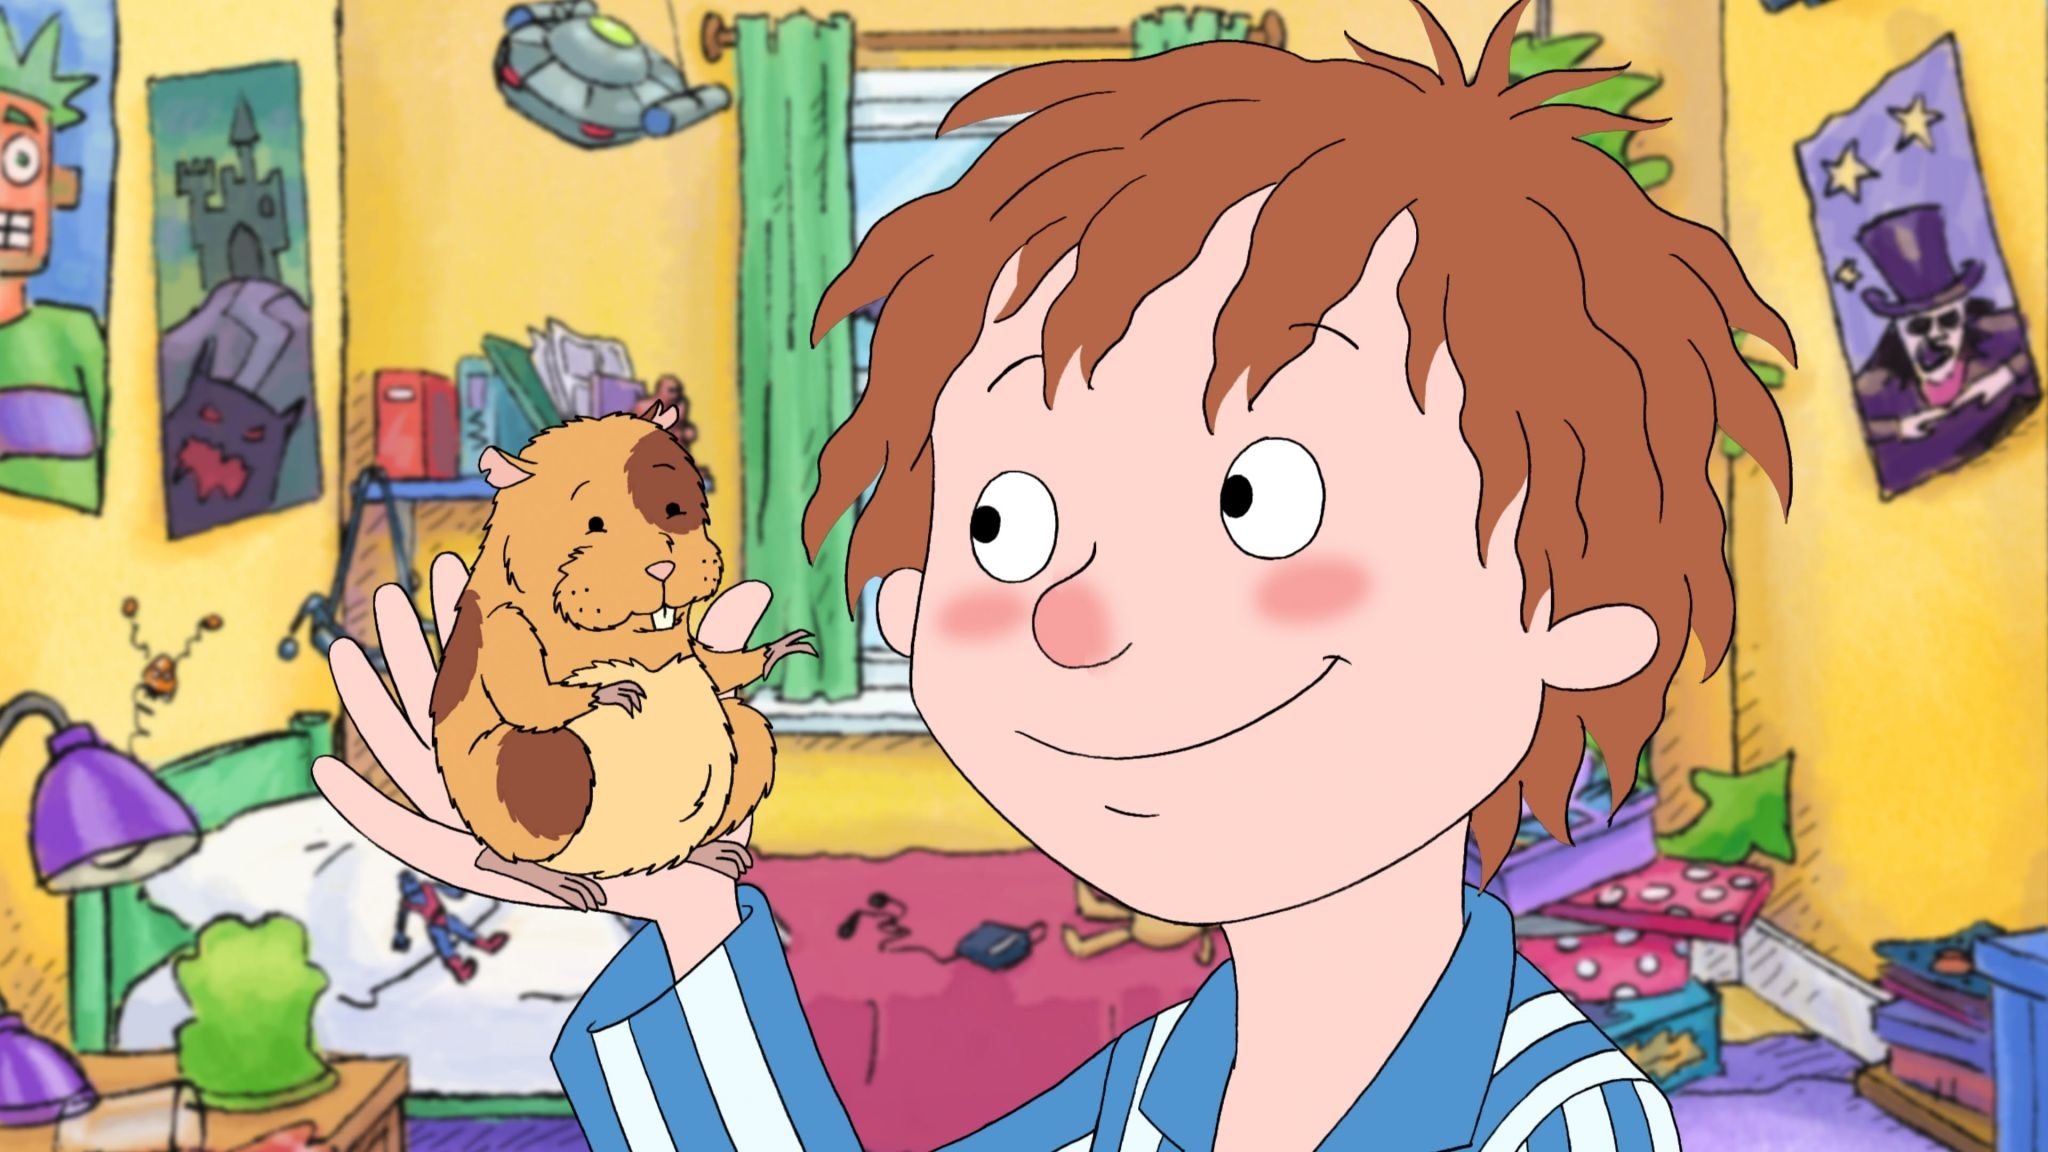 Animated character boy holding a hamster in his hands, surrounded by toys in a colorful room